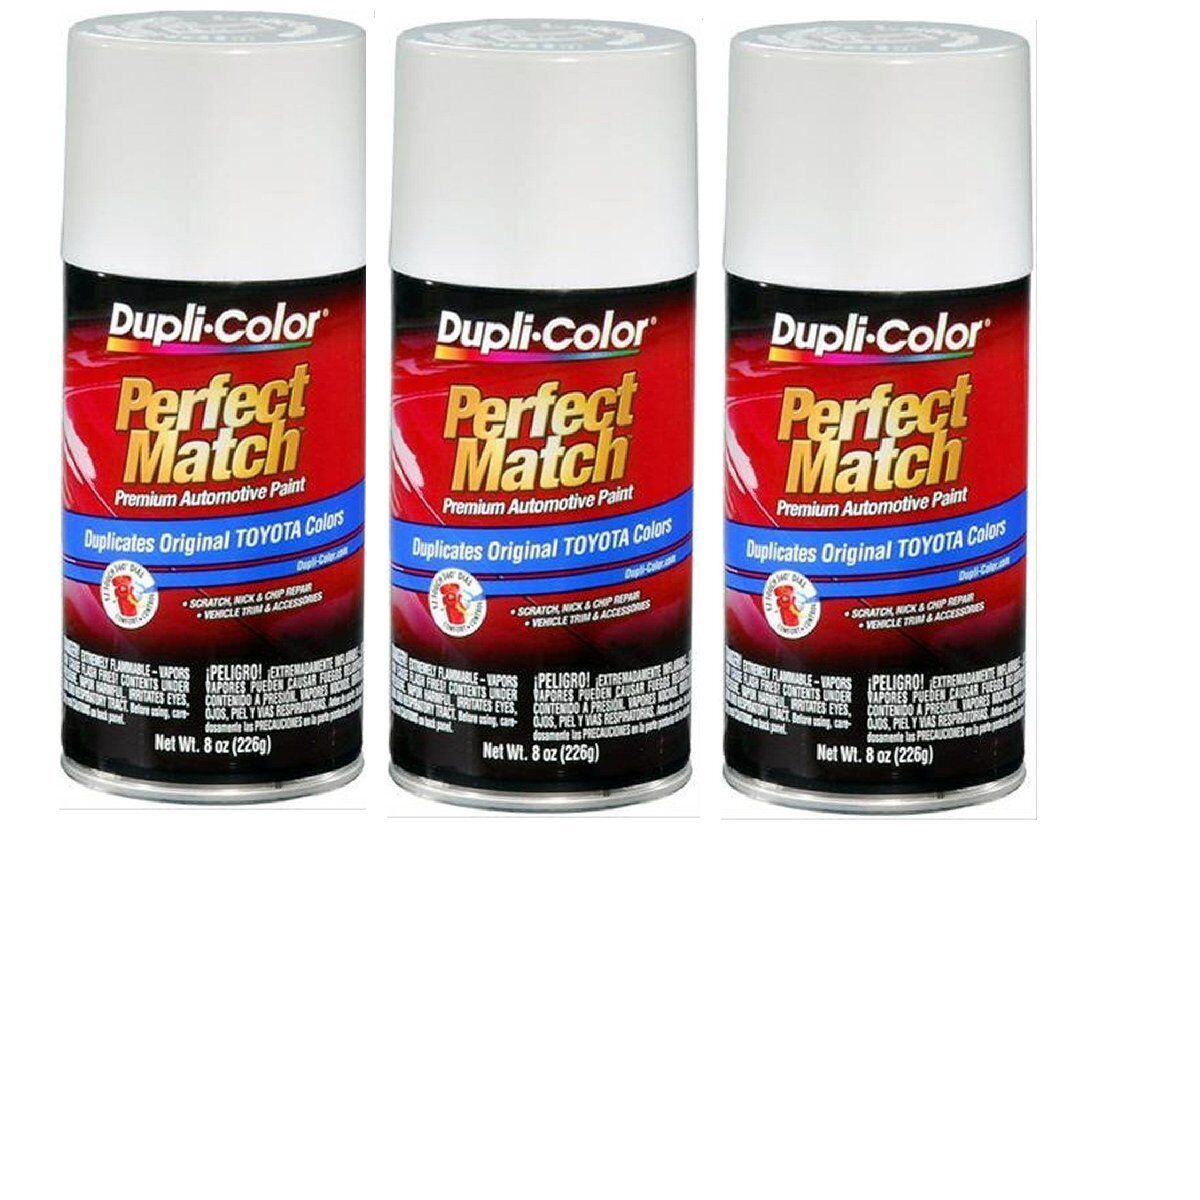 3 Cans-Duplicolor BTY1626 For Toyota Code 070 White Pearl Aerosol Spray Paint